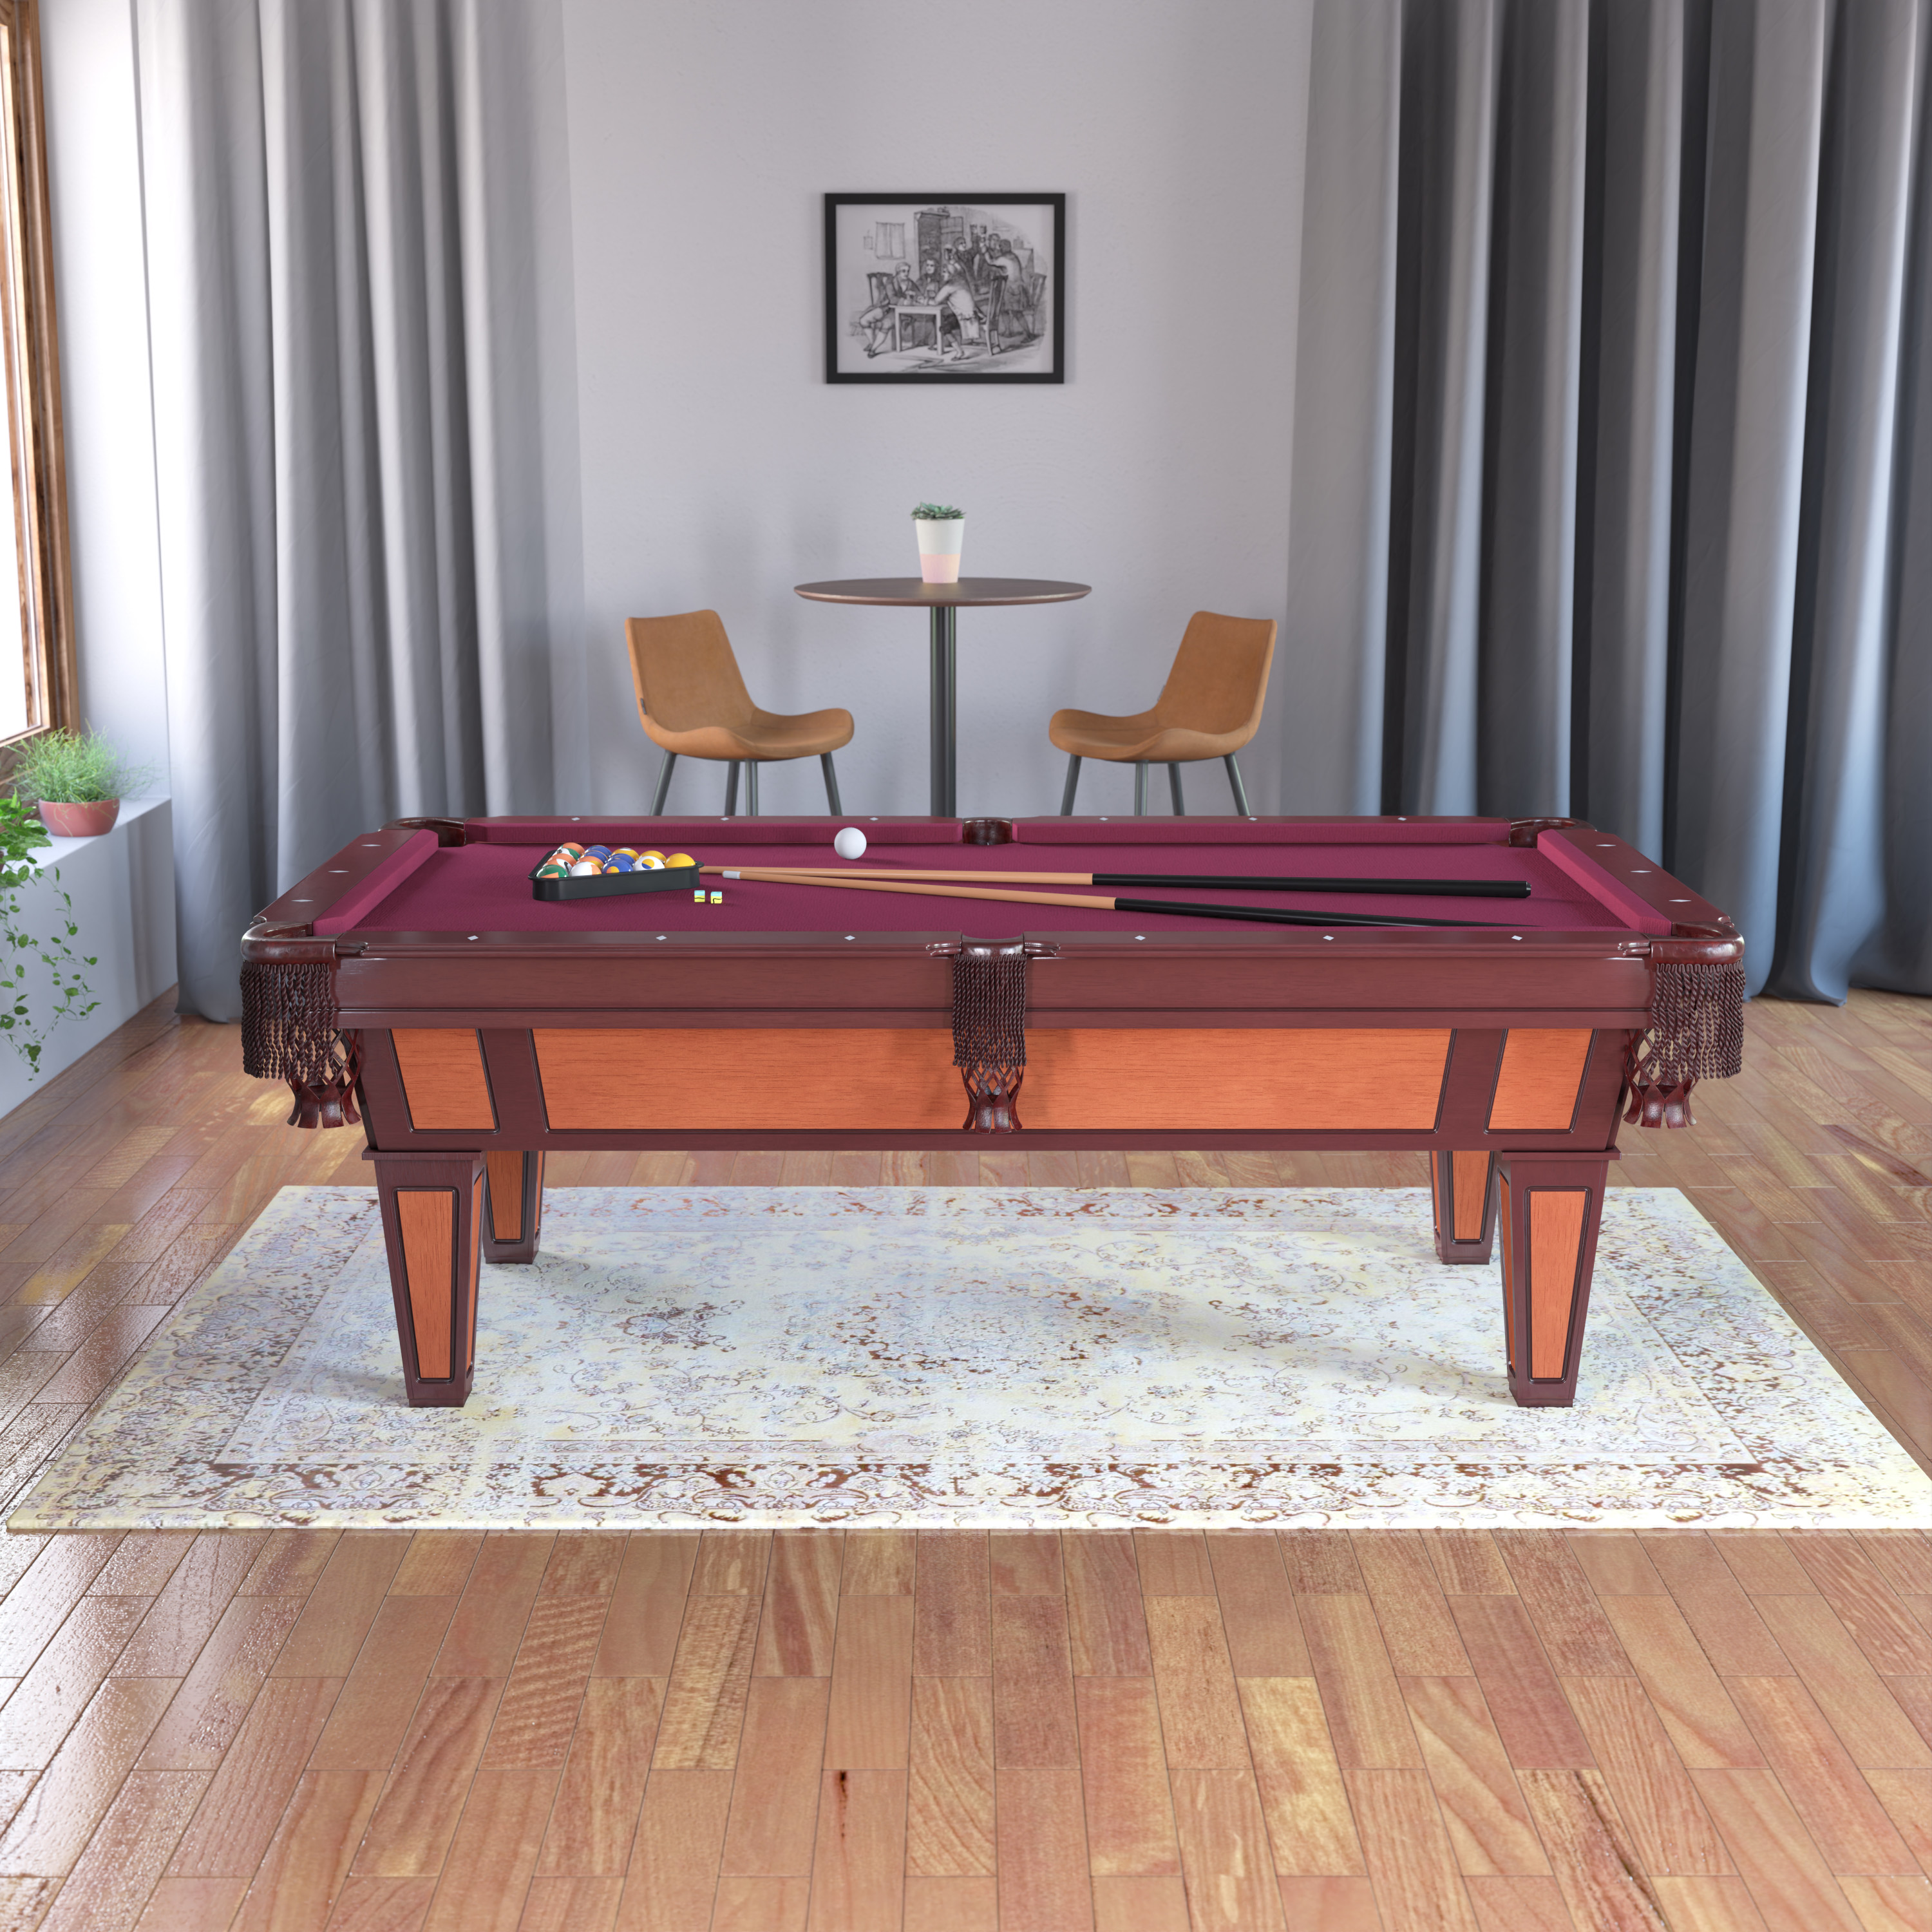 Fat Cat Reno 7.5' Pool Table with Pool Cues and Accessories - image 8 of 13